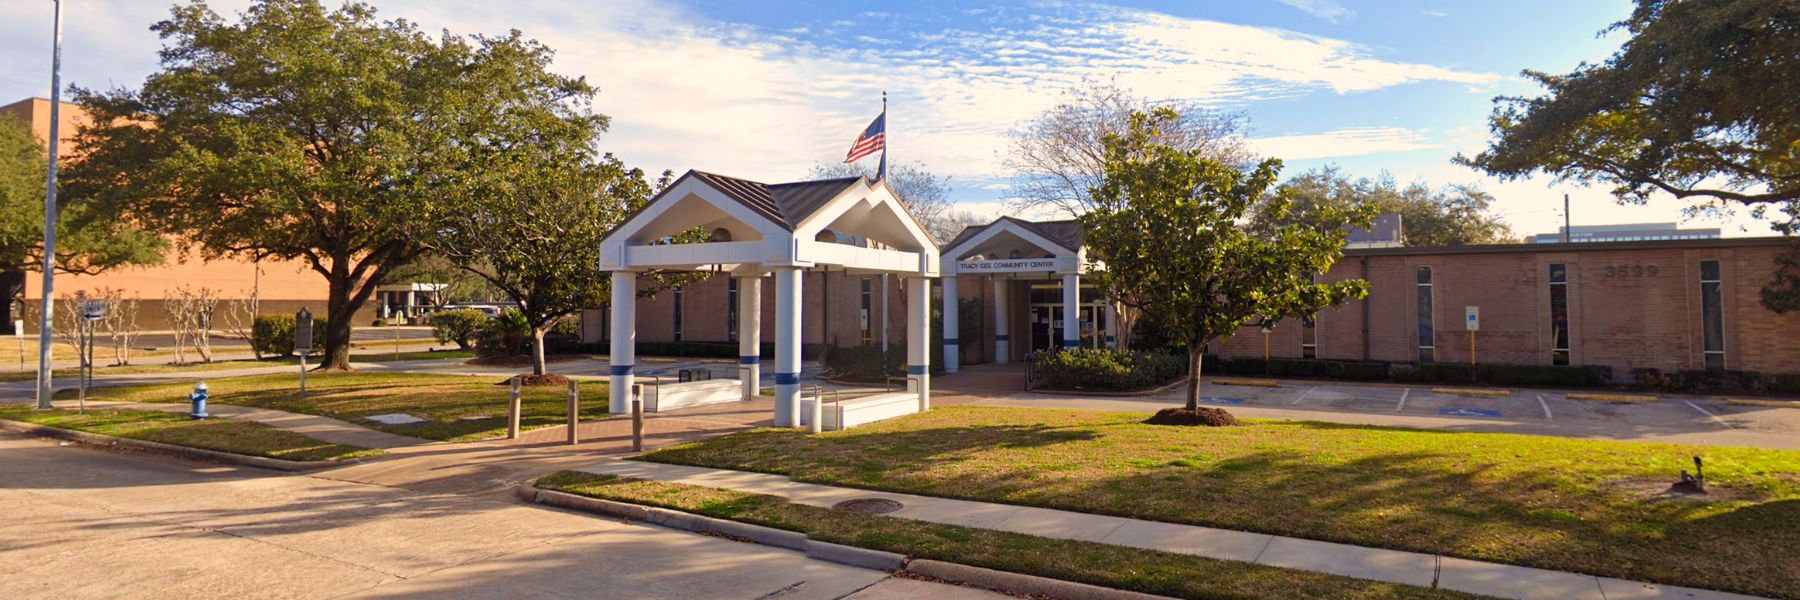 Tracy Gee Community Center